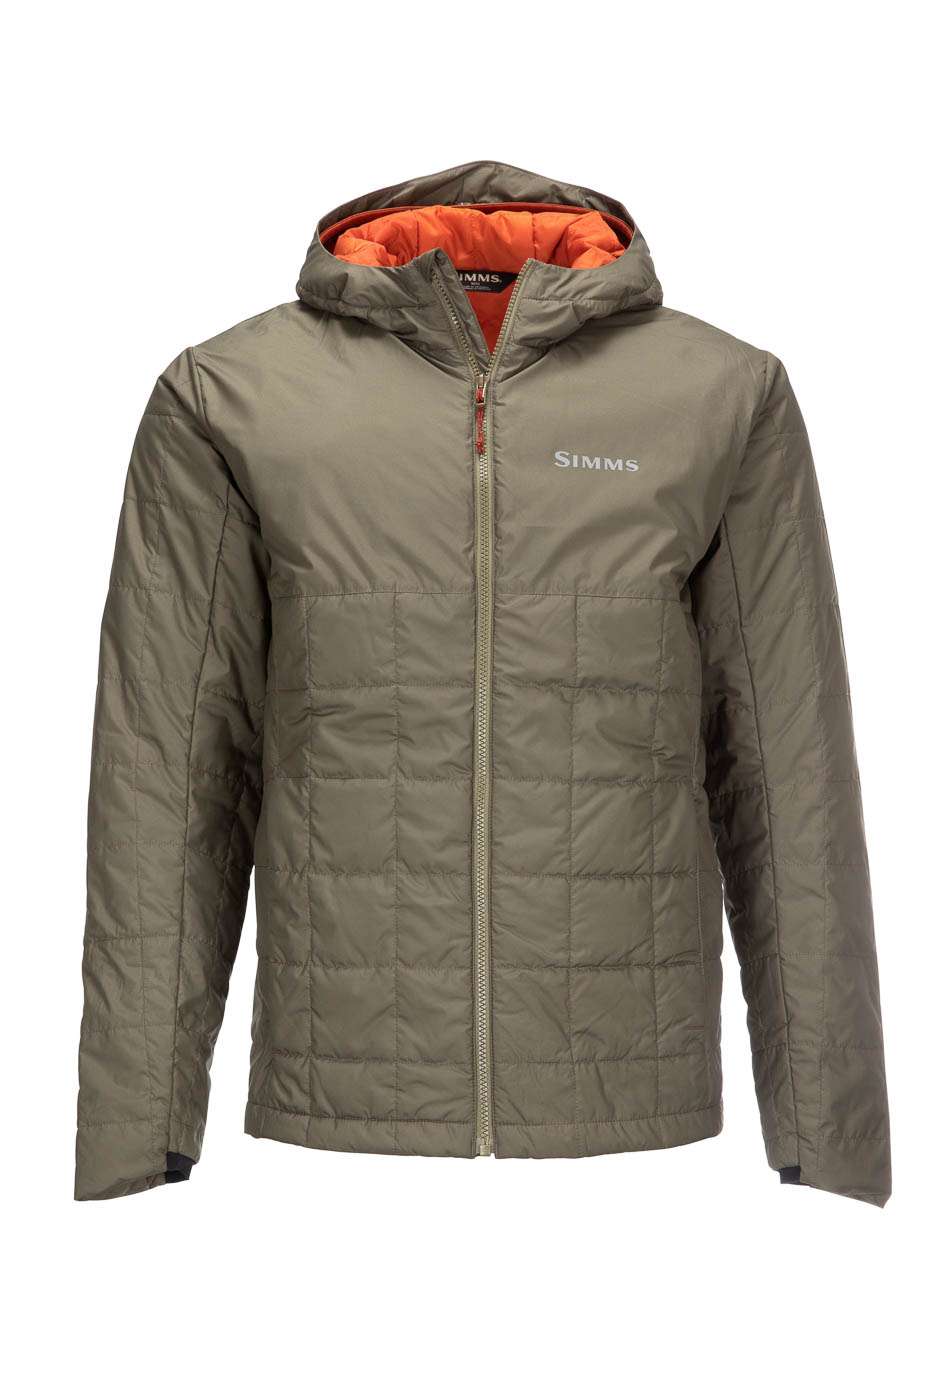 <p><strong>Simms Fall Run Hoody </strong></p><p>The Fall Run Hoody has Primaloft Black Eco Insulation, with a recycled polyester shell and lining, and a fully insulated hood for comfort and warmth. The upper front and back body feature internal quilting to provide a smooth exterior for abrasion resistance when worm with waders or bibs. Zippered handwarmer pockets and an internal chest zippered pocket add to the functionality. Available August 2021. $149.95. <a href=